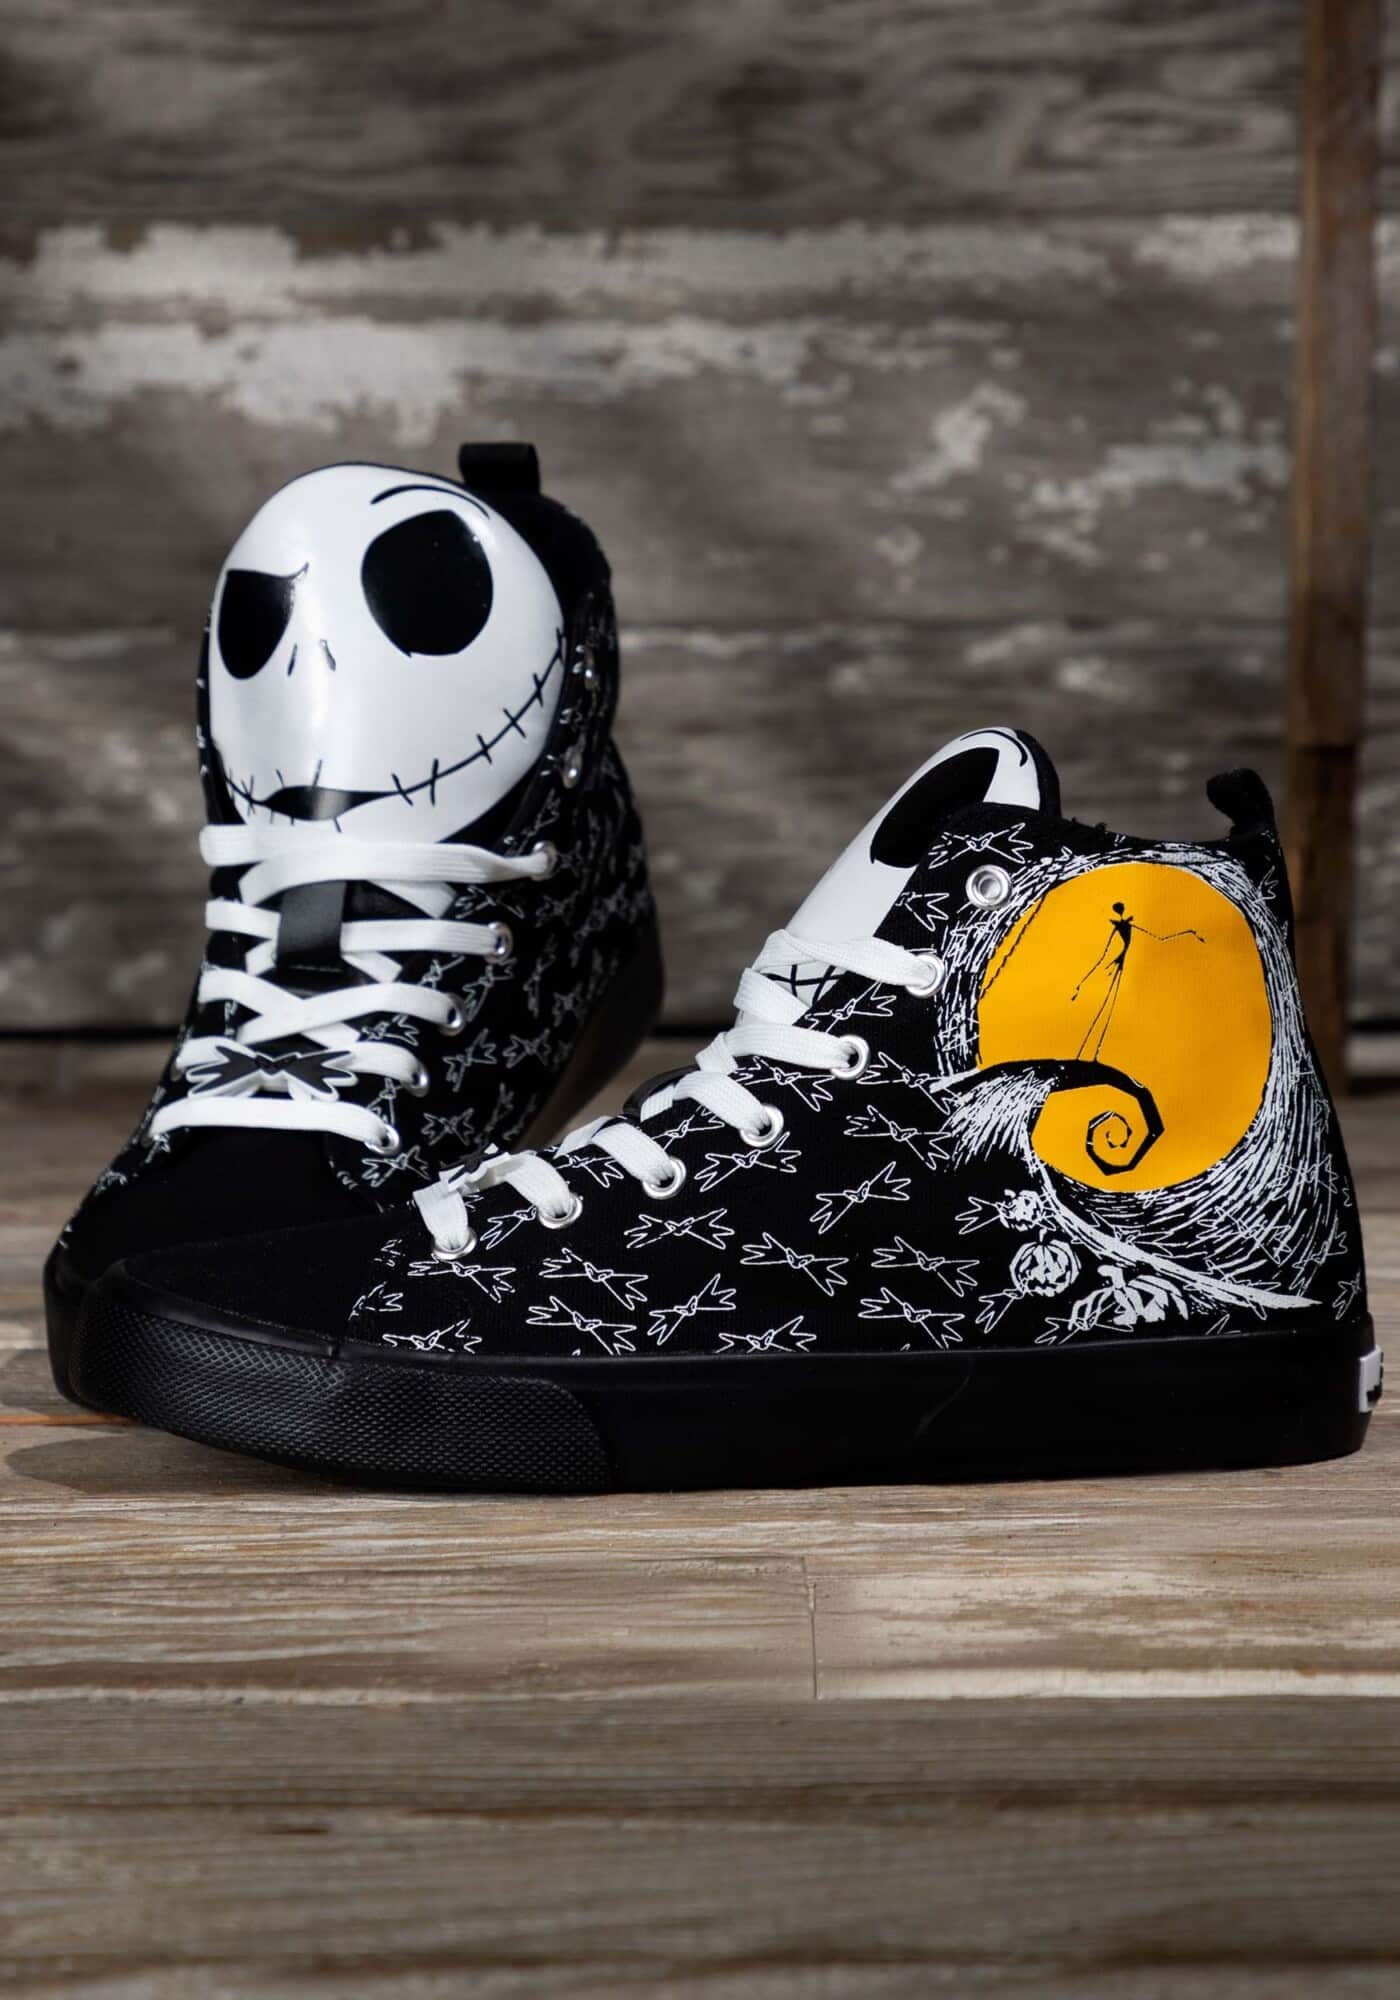 https://www.themainstreetmouse.com/wp-content/uploads/2022/08/nightmare-before-christmas-jack-skellington-shoes-2.jpg